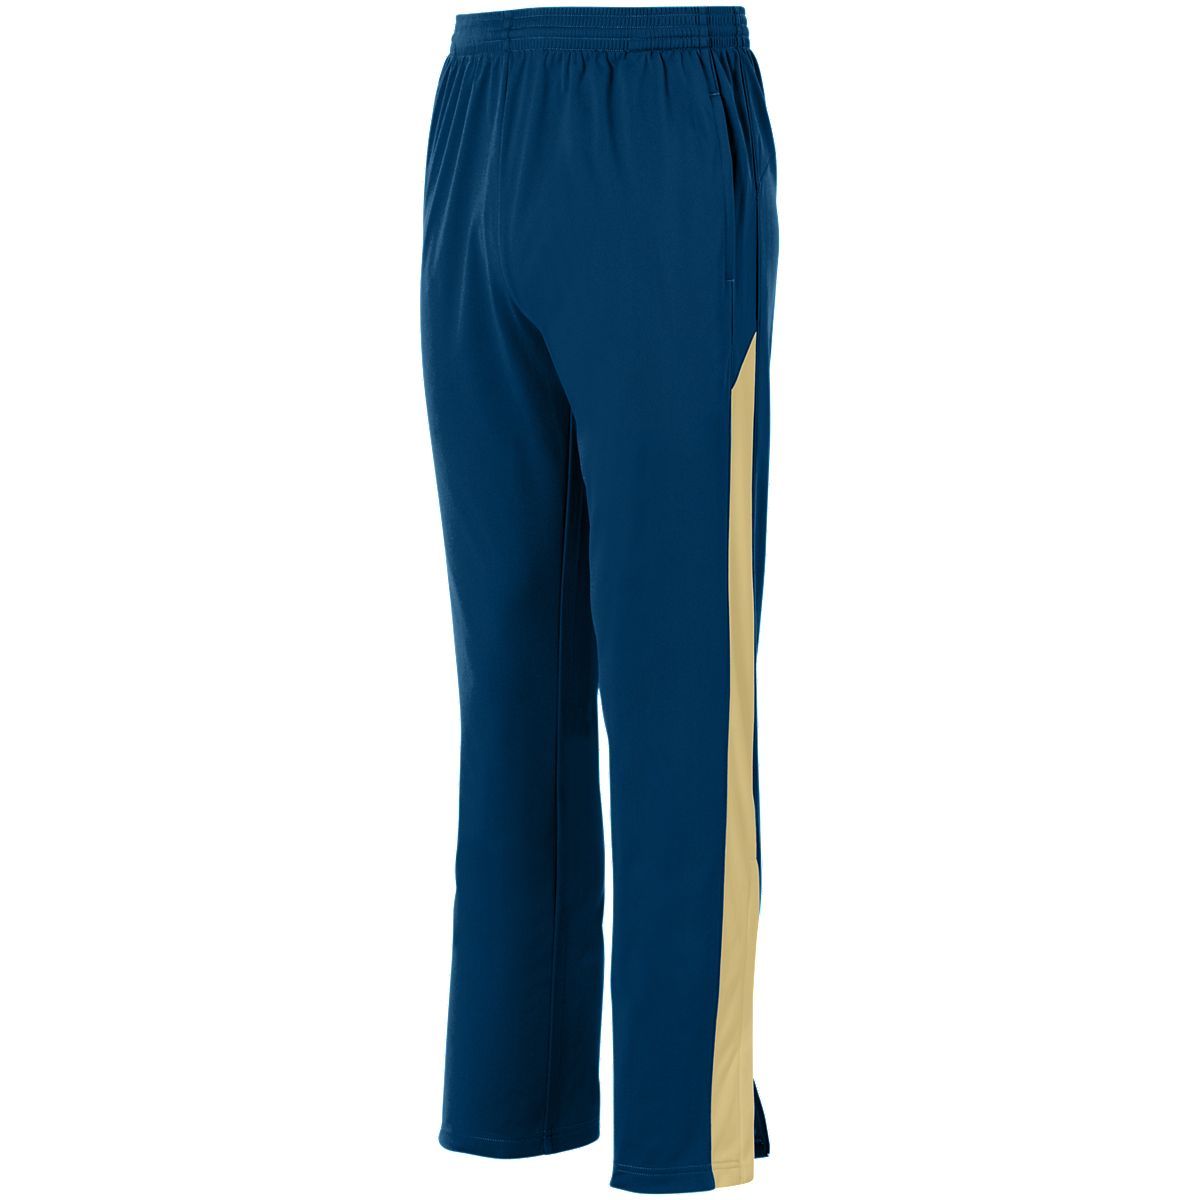 Augusta Sportswear Medalist Pant 2.0 in Navy/Vegas Gold  -Part of the Adult, Adult-Pants, Pants, Augusta-Products product lines at KanaleyCreations.com